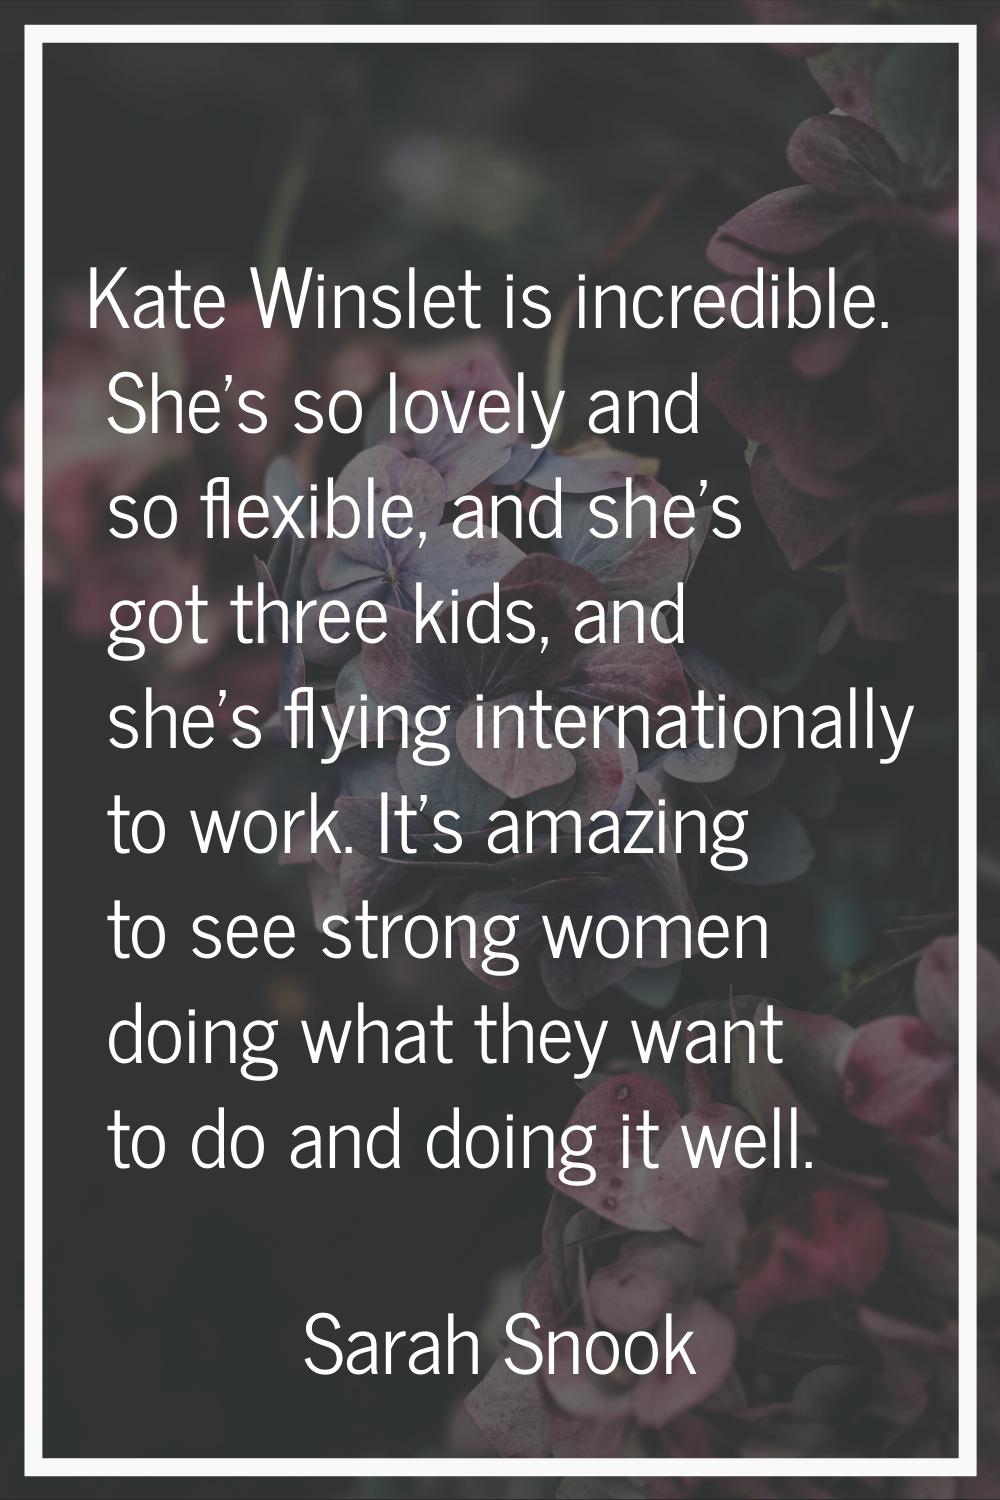 Kate Winslet is incredible. She's so lovely and so flexible, and she's got three kids, and she's fl